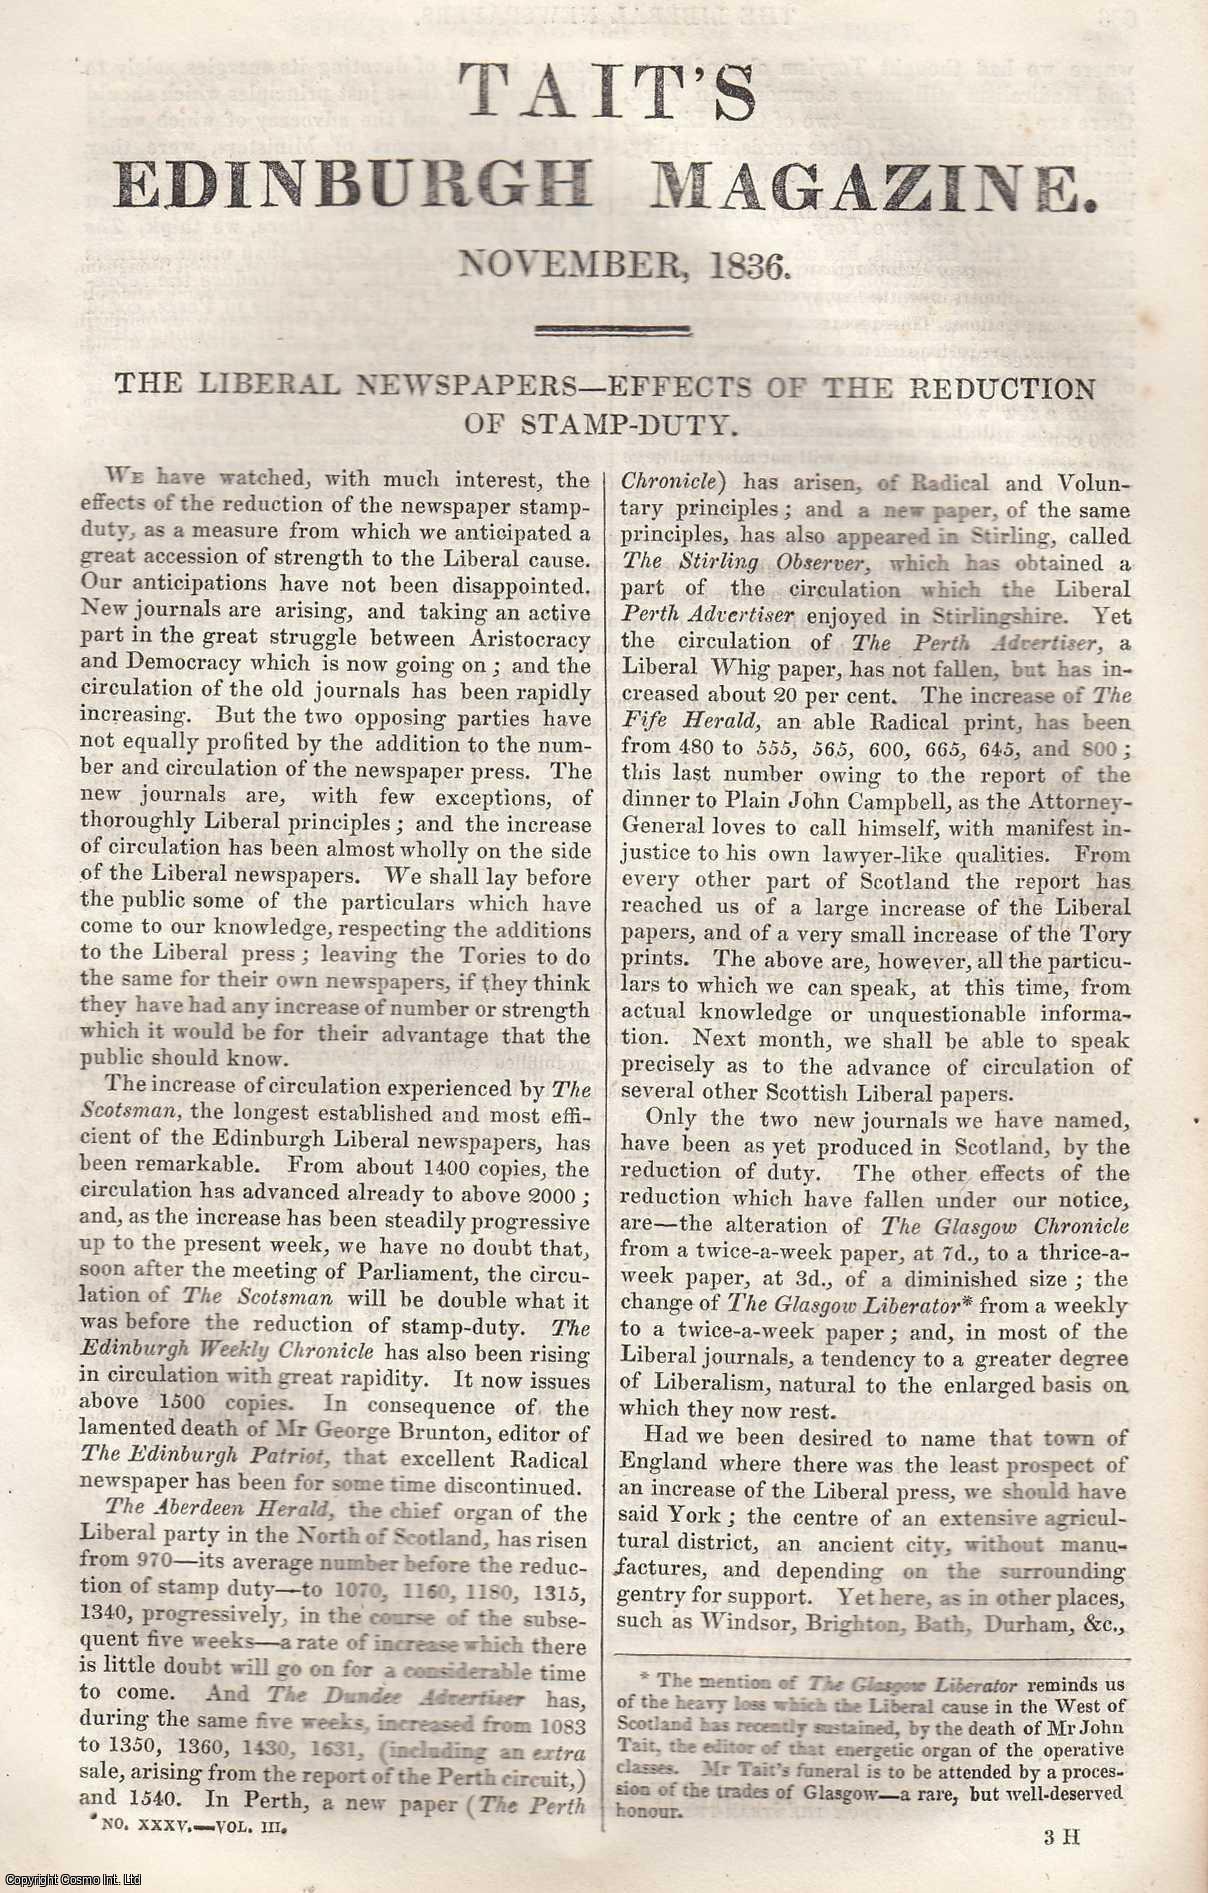 Darling, J. J. - The Liberal Newspapers: Effects of The Reduction of Stamp-Duty (No. 1). An original article from Tait's Edinburgh Magazine, 1836.